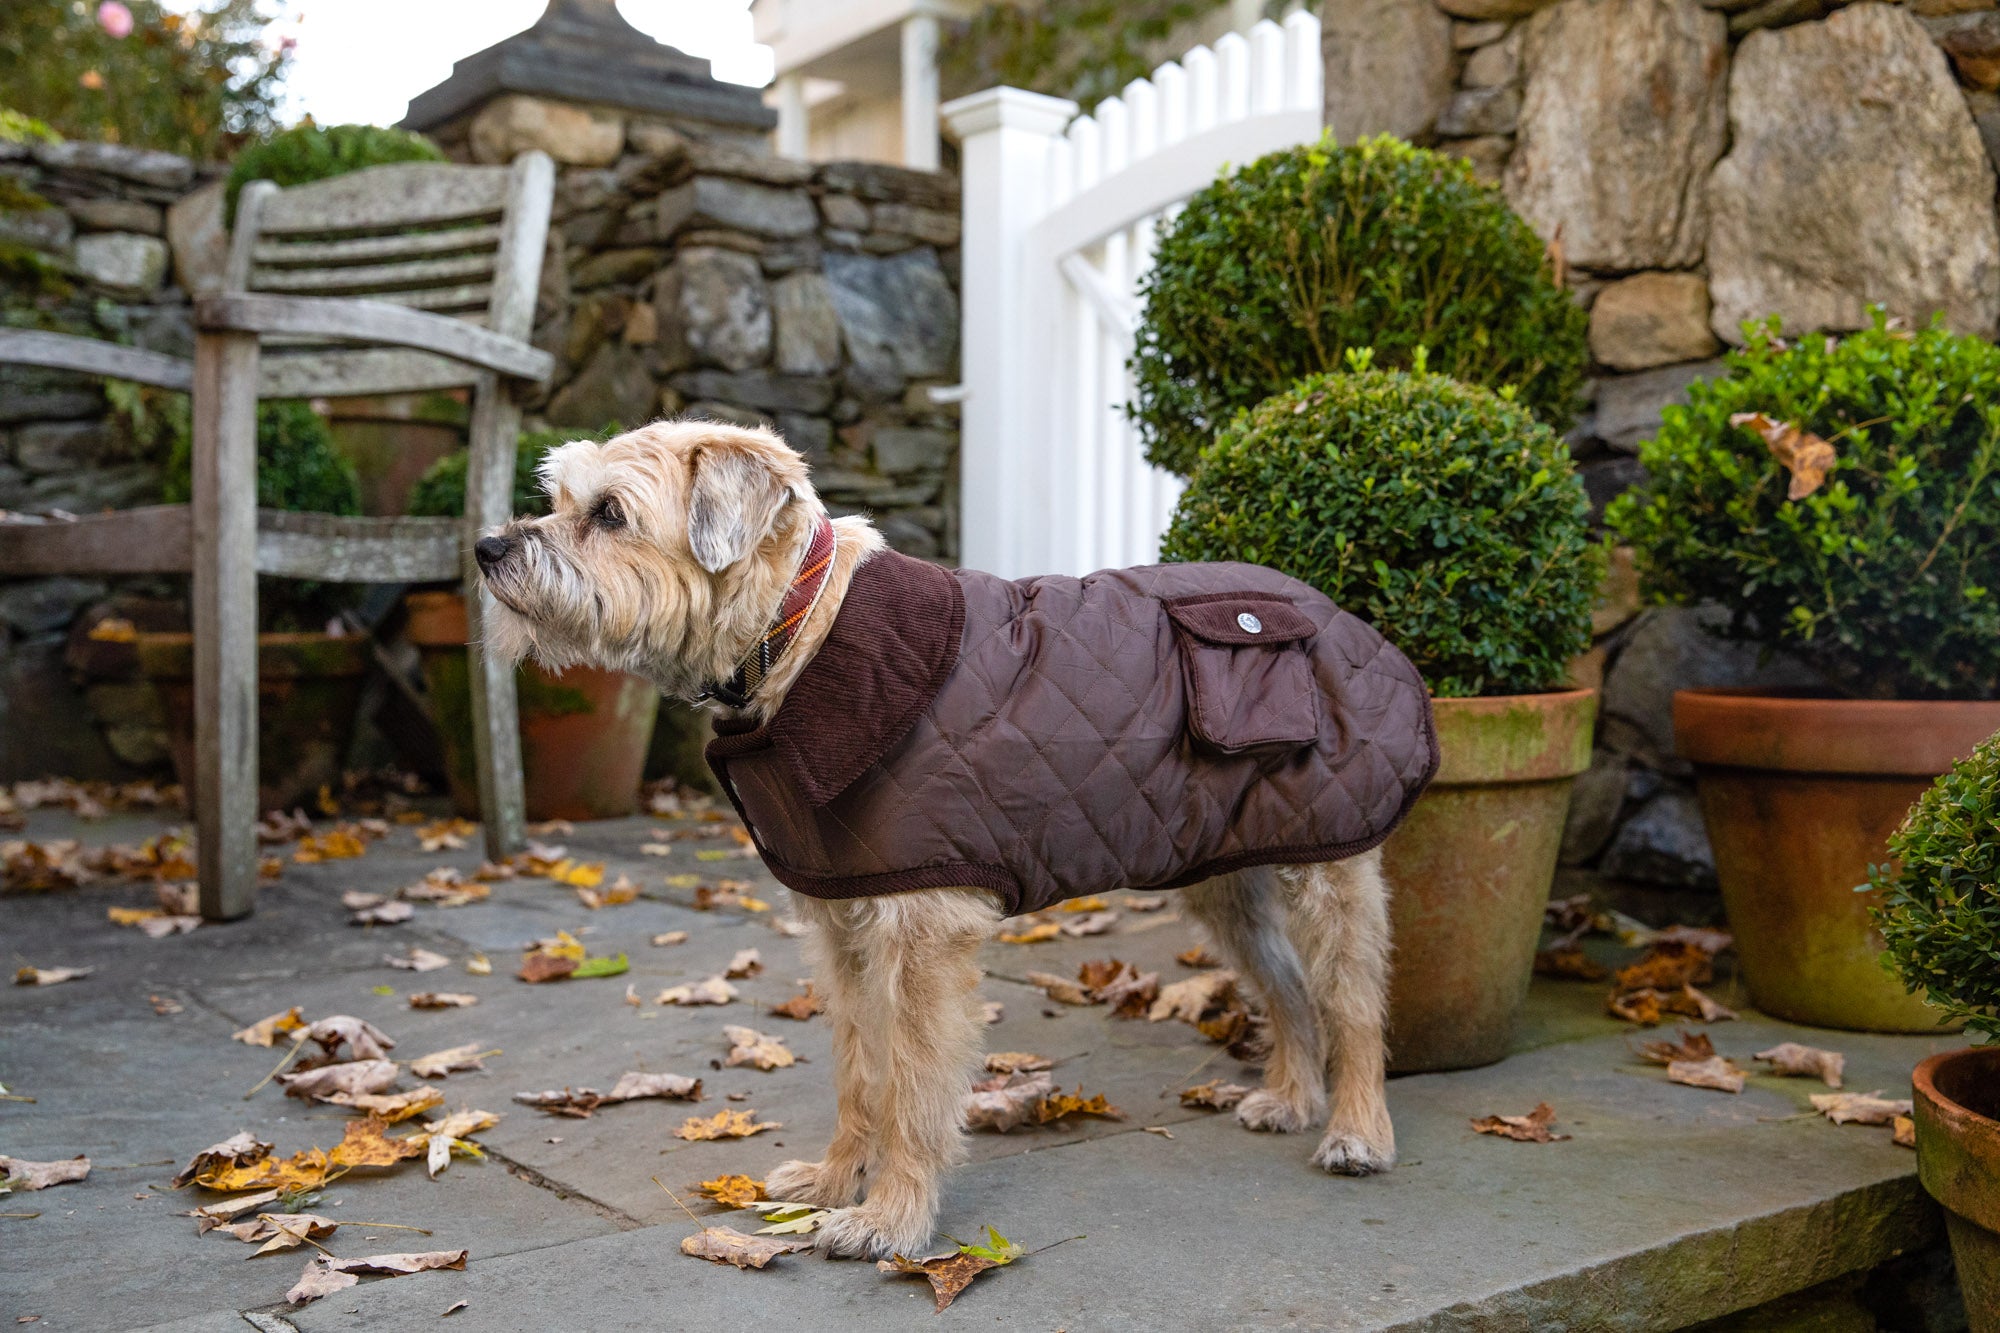 Barn Dog Coat, Quilted, Light weight & Water Resistant